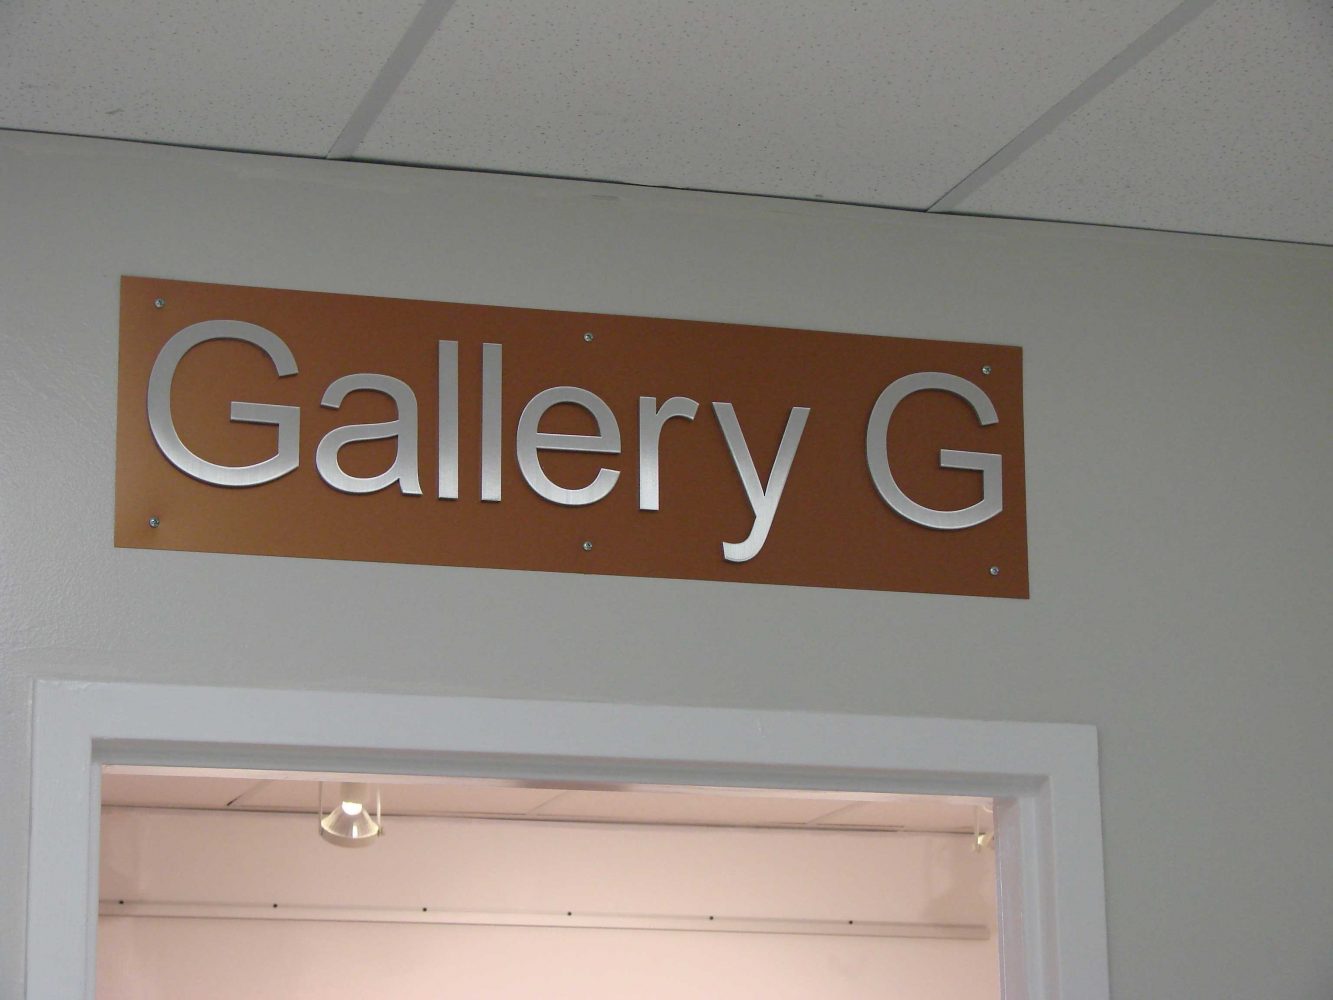 Gallery+G+opens+with+exhibit